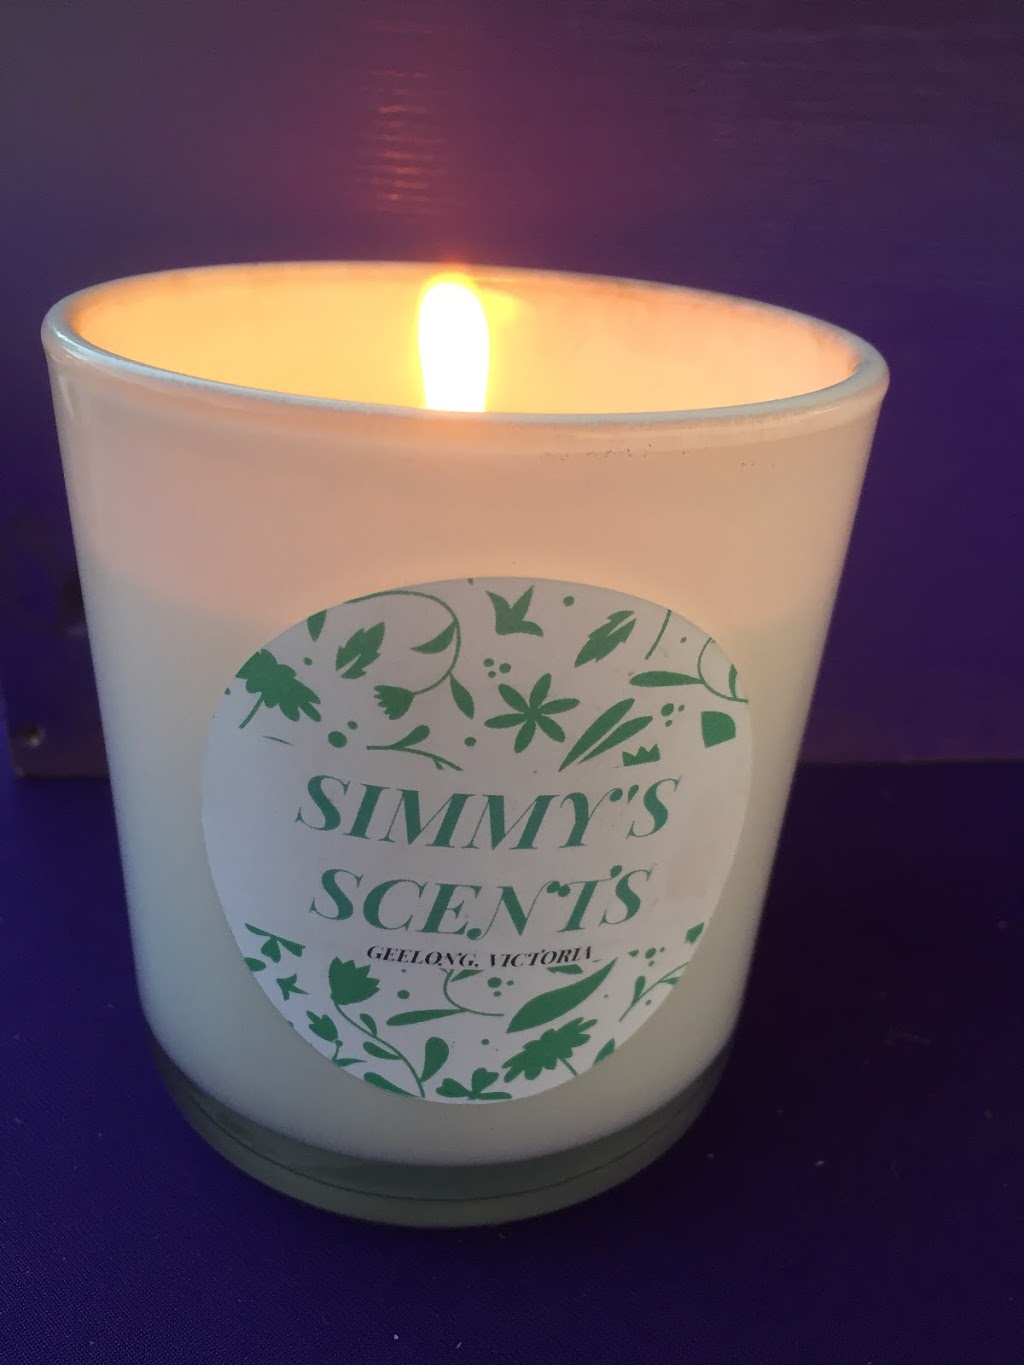 Simmy’s Scents | home goods store | 475 English Rd, Lethbridge VIC 3216, Australia | 0433590726 OR +61 433 590 726